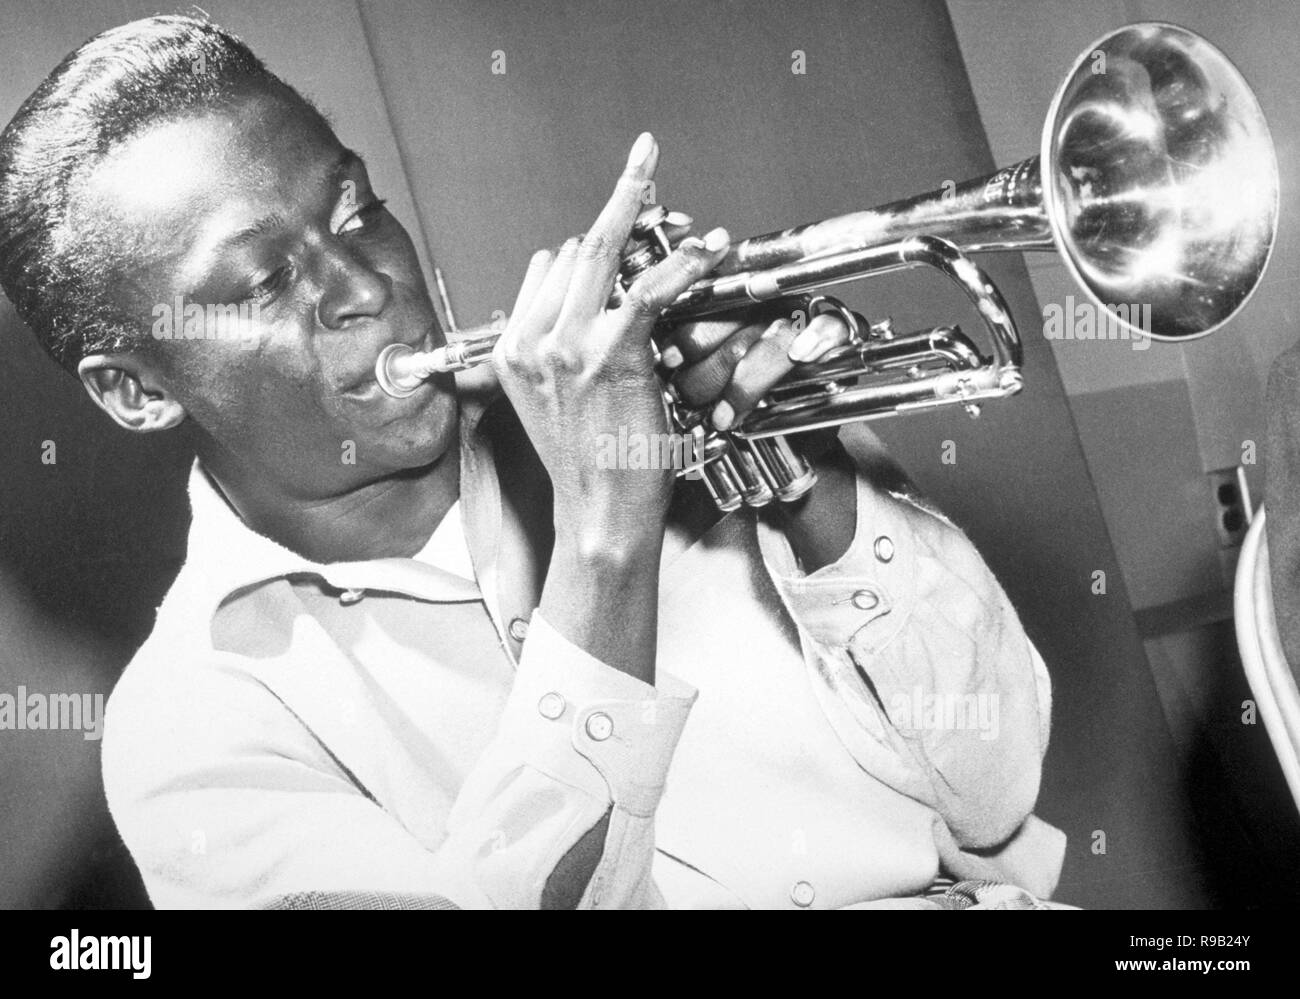 American jazz musician and composer Miles Davis playing the trumpet, 50s. Stock Photo